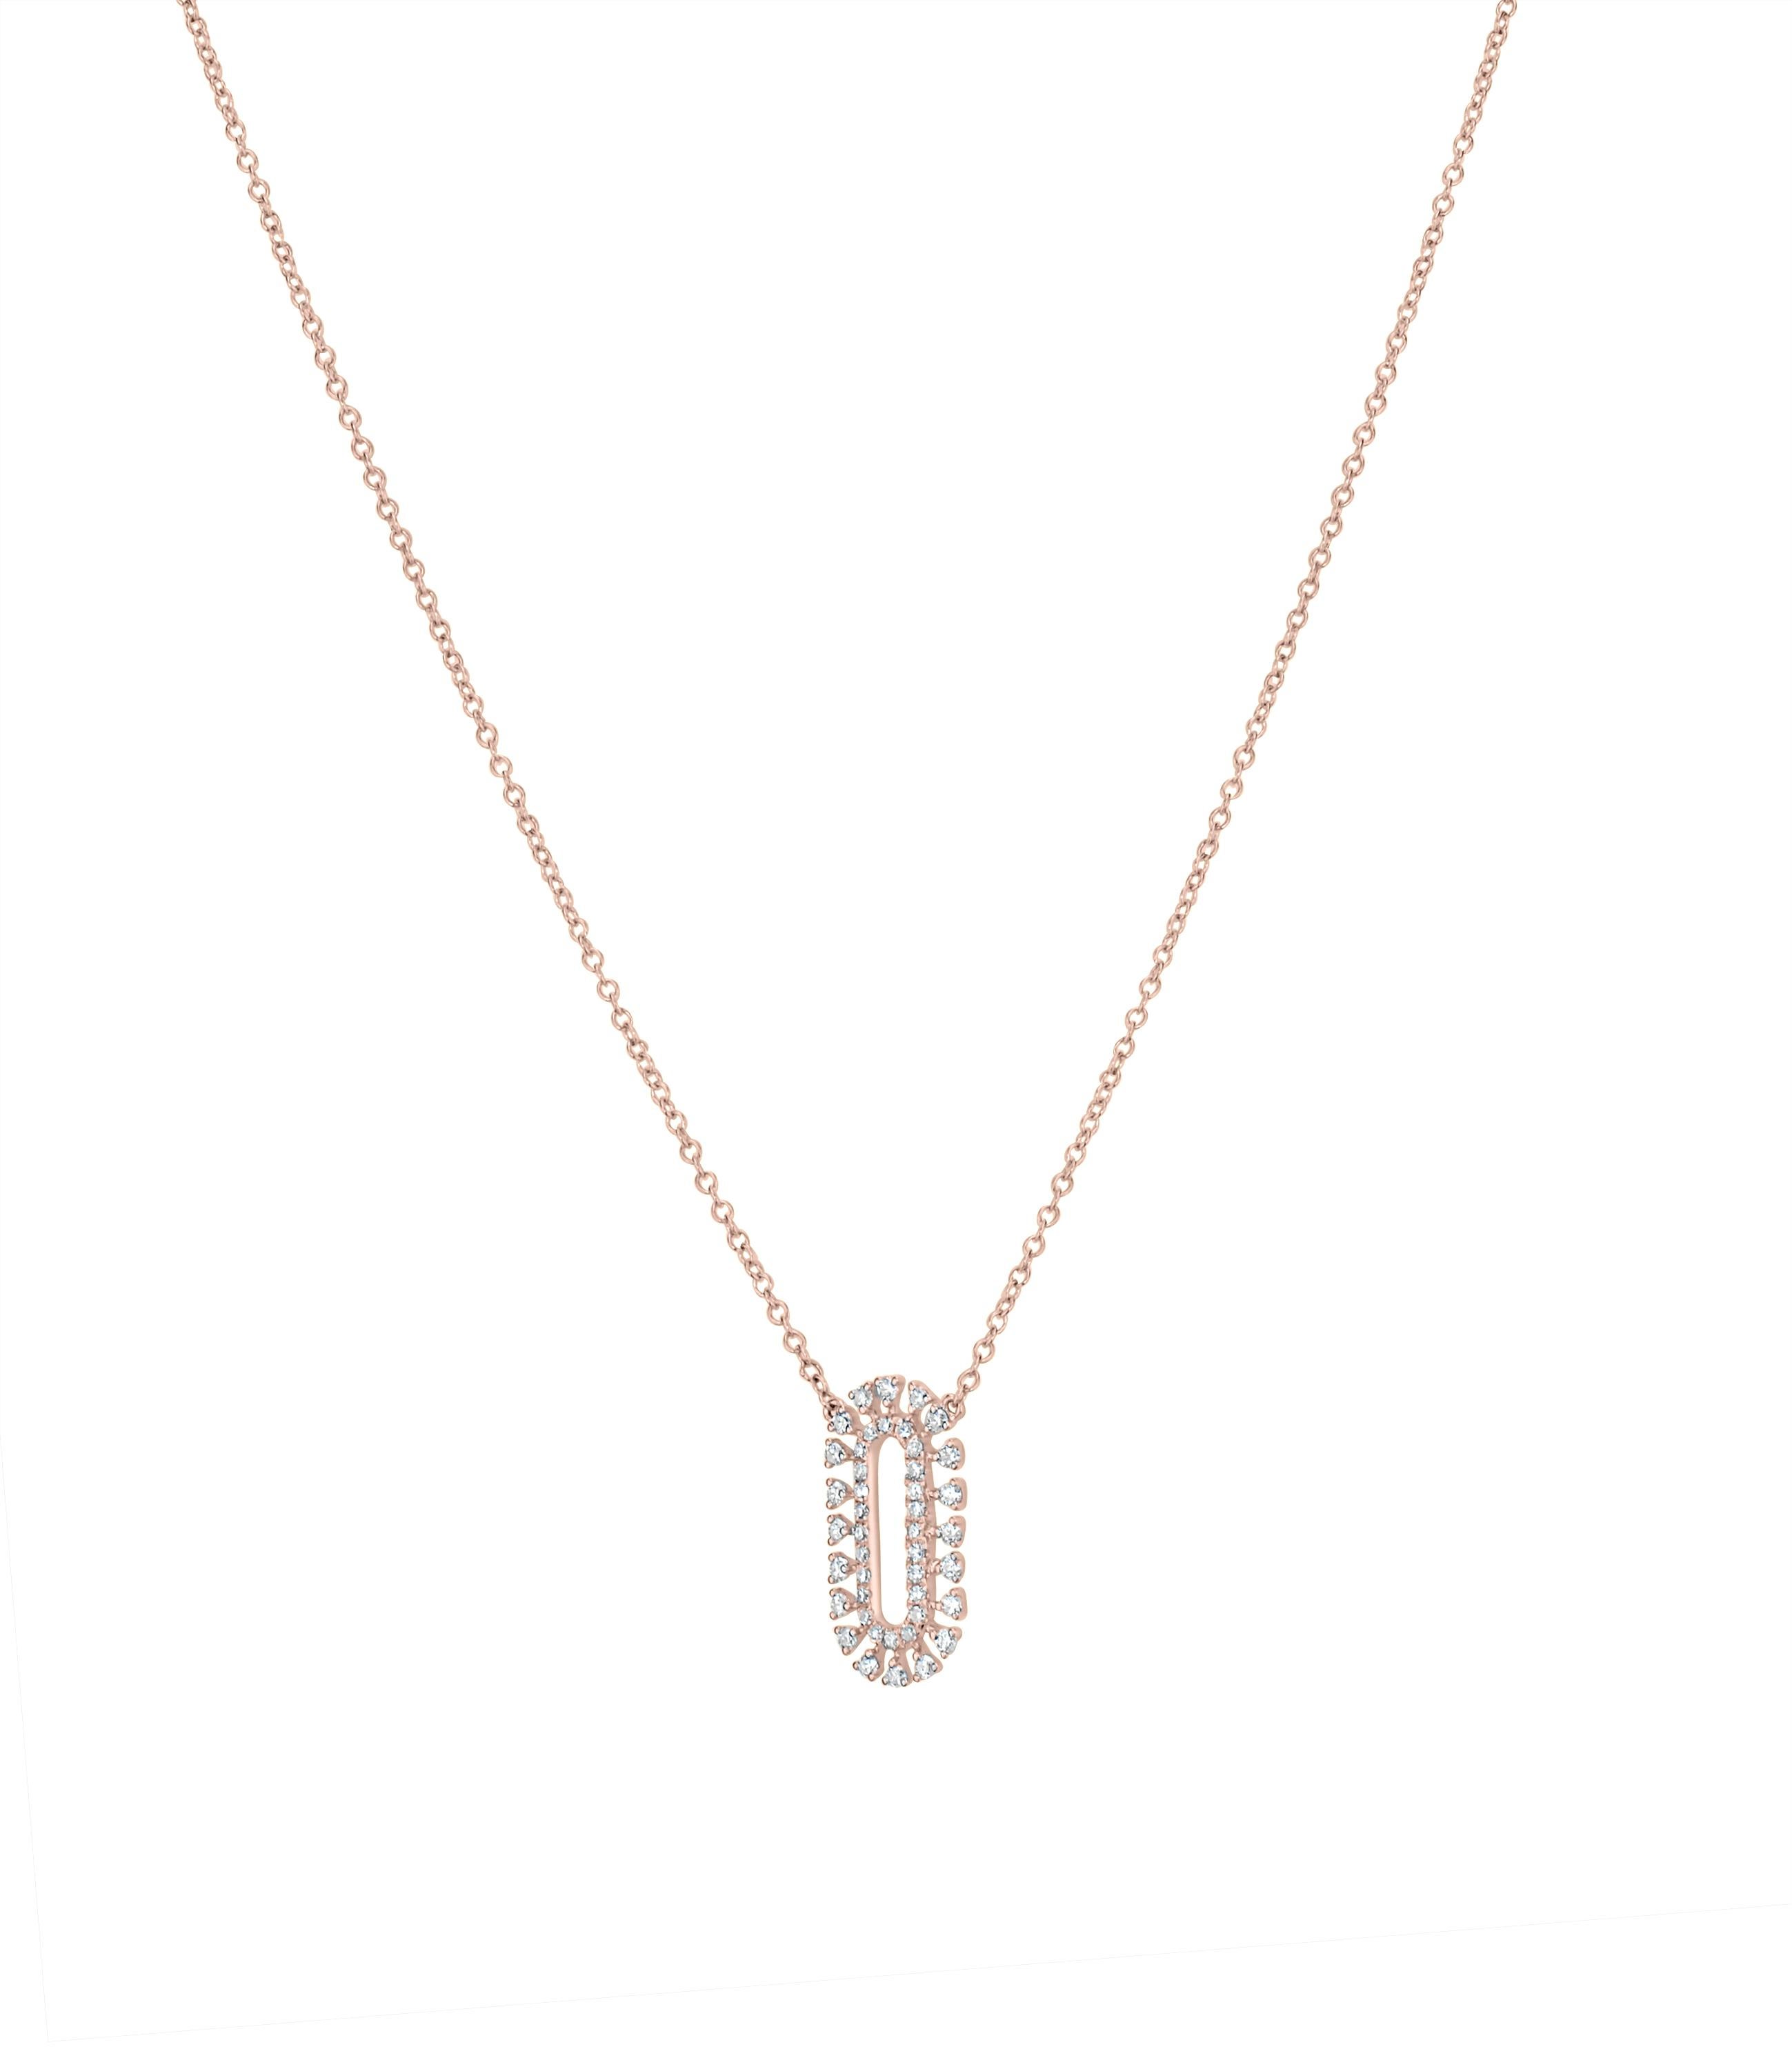 Freshen up your looks with this delicate necklace featuring an openwork oval pendant embellished with pave set diamonds suspended from a cable chain of 18K rose gold.
JEWELRY SPECIFICATION:
Approx. Metal Weight: 2.07 gram
Approx. Diamond Weight: